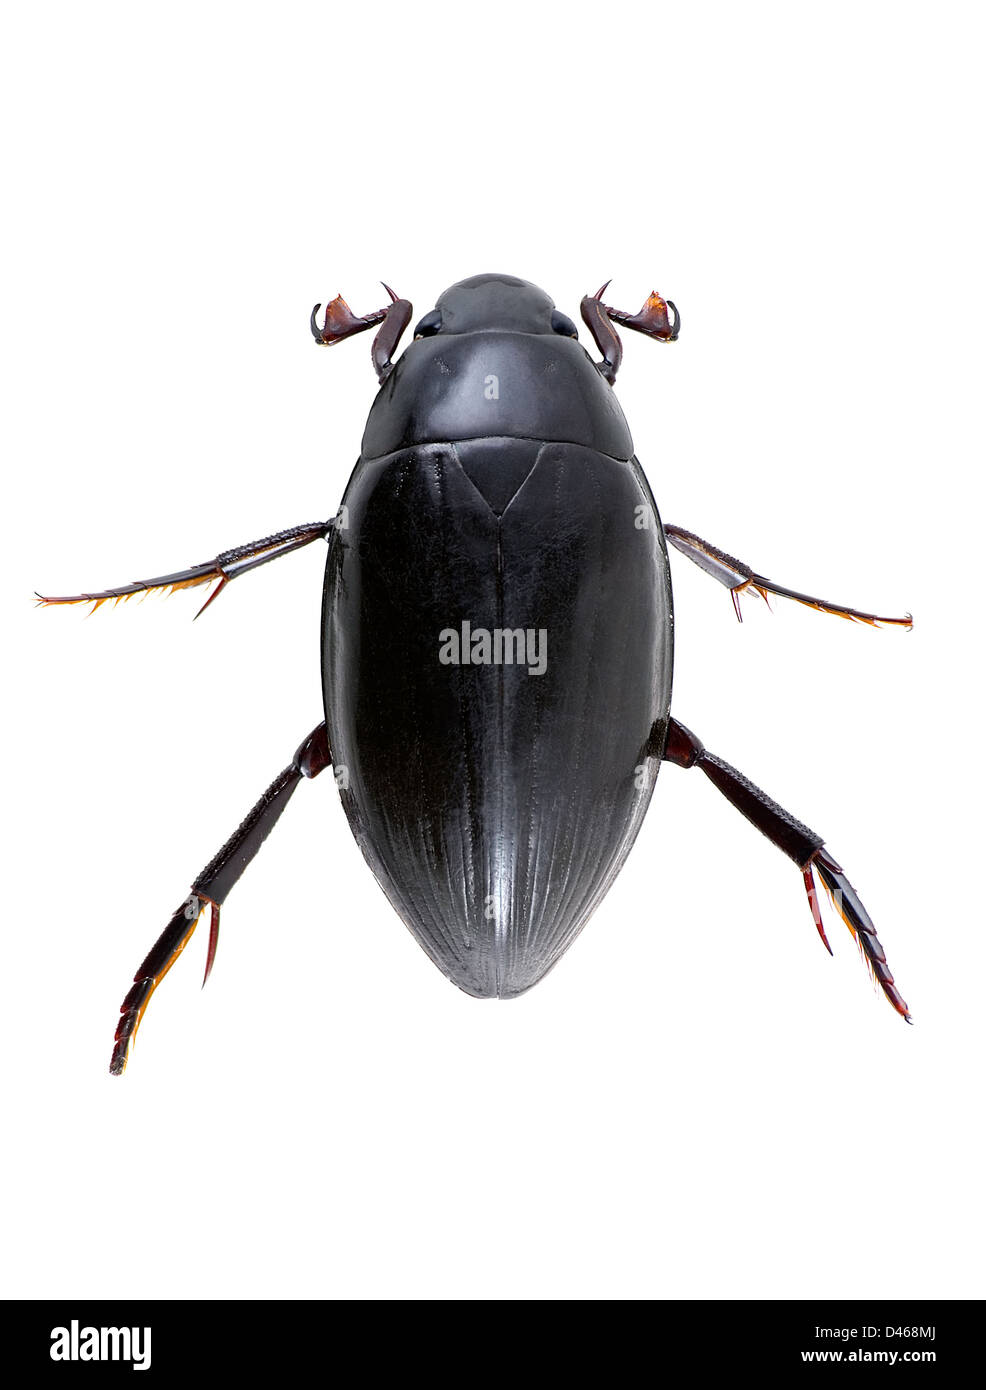 Beetle 'Water-tiger' is photographed on the white background Stock Photo